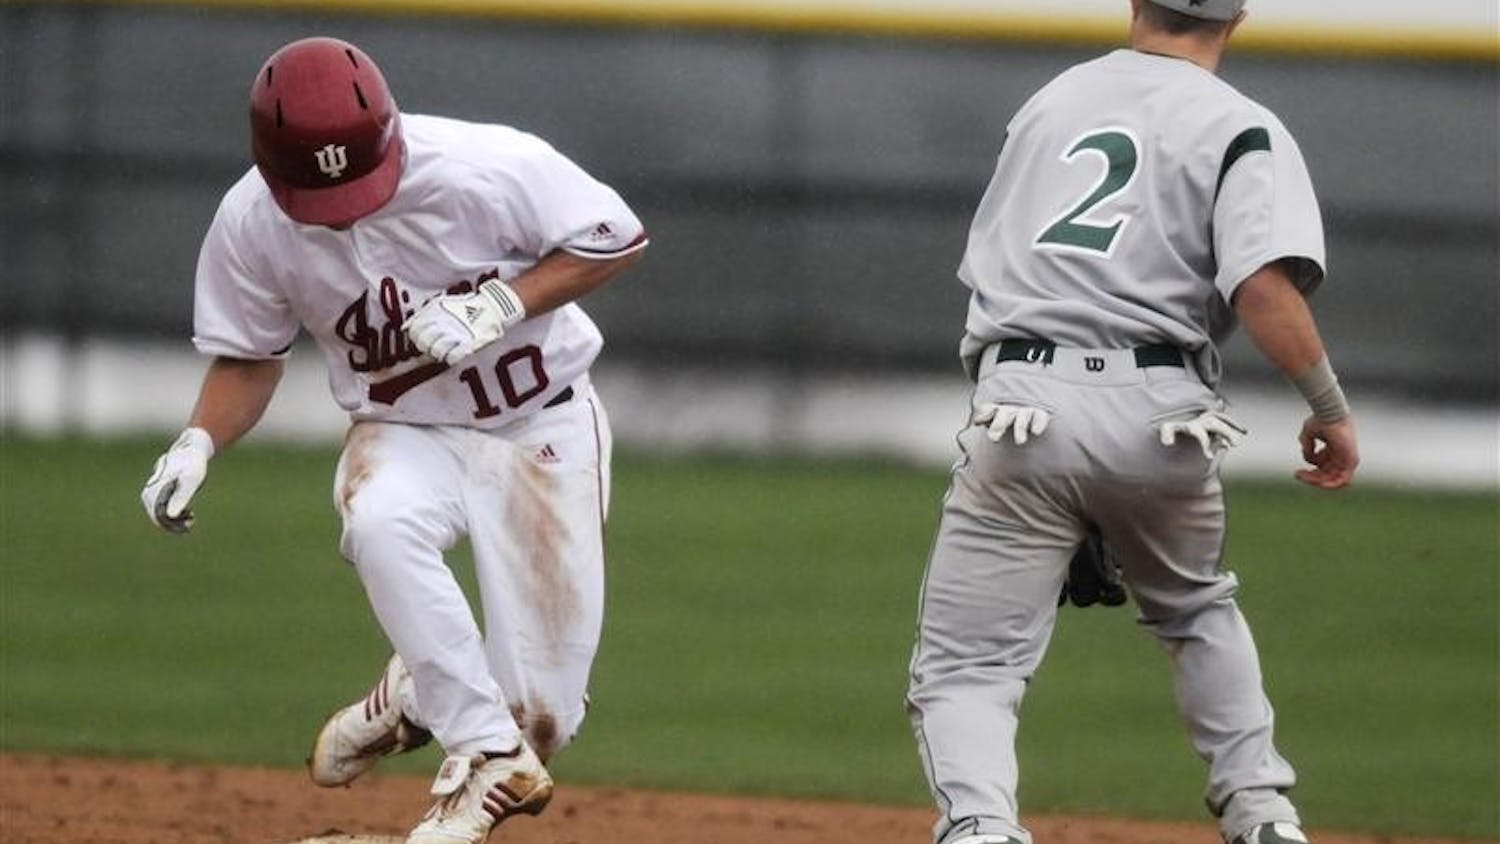 Sophomore outfielder Brian Lambert jumps onto second base after a steal in the rain against Chicago State on Tuesday afternoon at Sembower Field. The Hoosiers face Illinois at 7:05 p.m. Friday on the road.